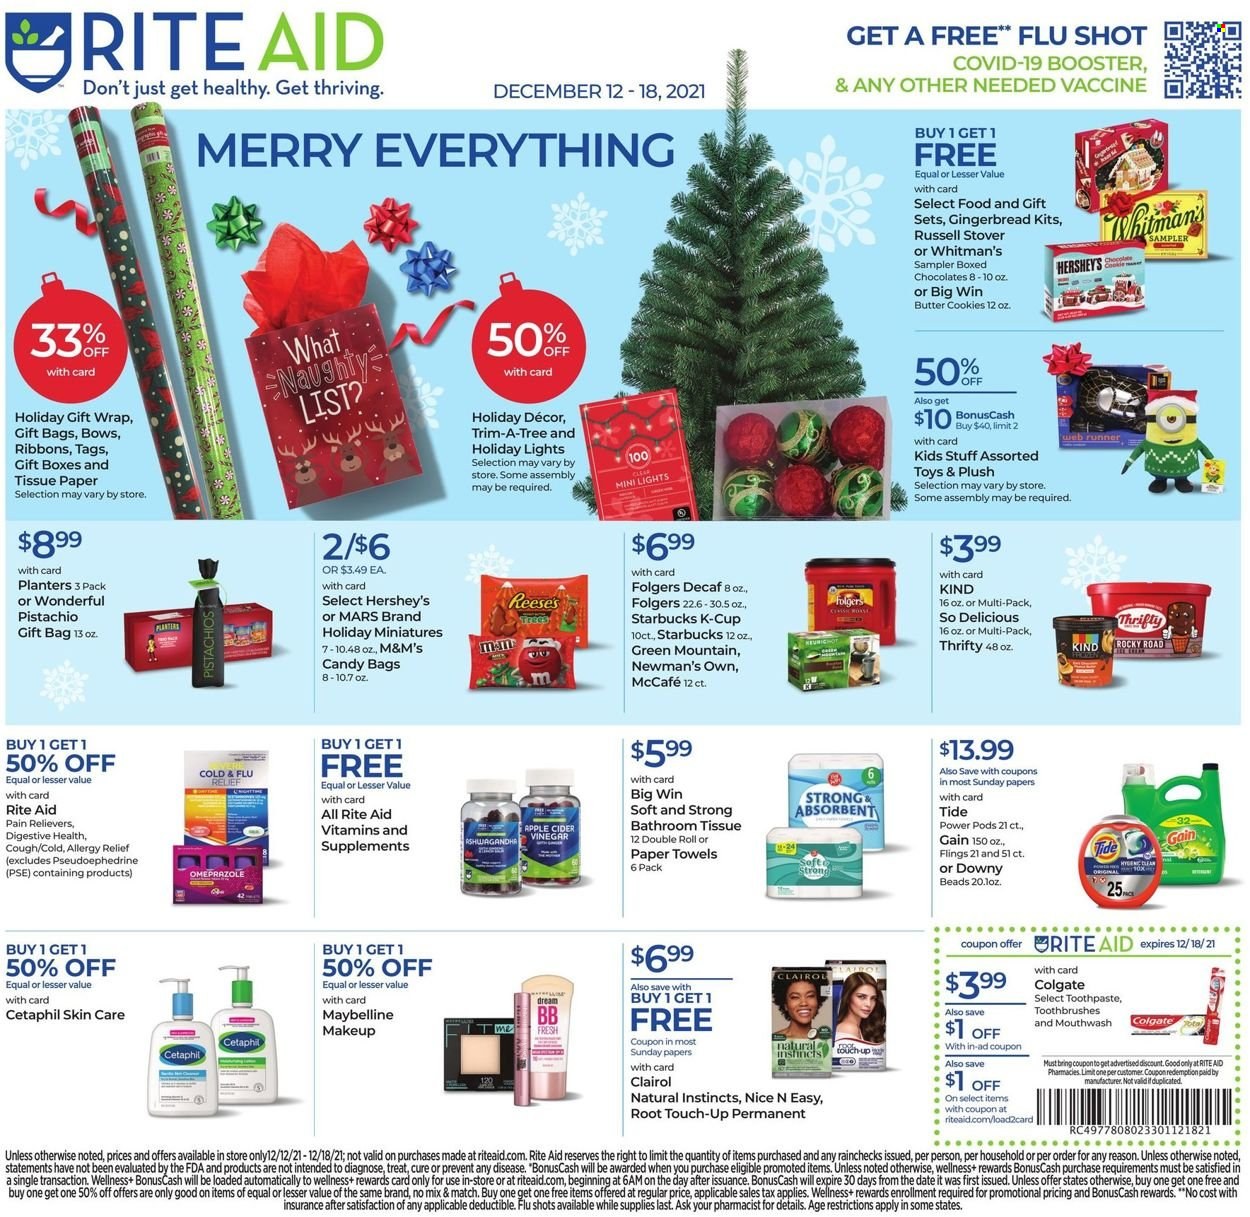 thumbnail - RITE AID Flyer - 12/12/2021 - 12/18/2021 - Sales products - Reese's, Hershey's, cookies, gingerbread, chocolate, butter cookies, Mars, M&M's, Planters, Starbucks, Folgers, coffee capsules, McCafe, K-Cups, Green Mountain, cider, bath tissue, toilet paper, kitchen towels, paper towels, Gain, Tide, Colgate, toothpaste, mouthwash, Root Touch-Up, Clairol, Brite, makeup, Maybelline, Cold & Flu, allergy relief. Page 1.